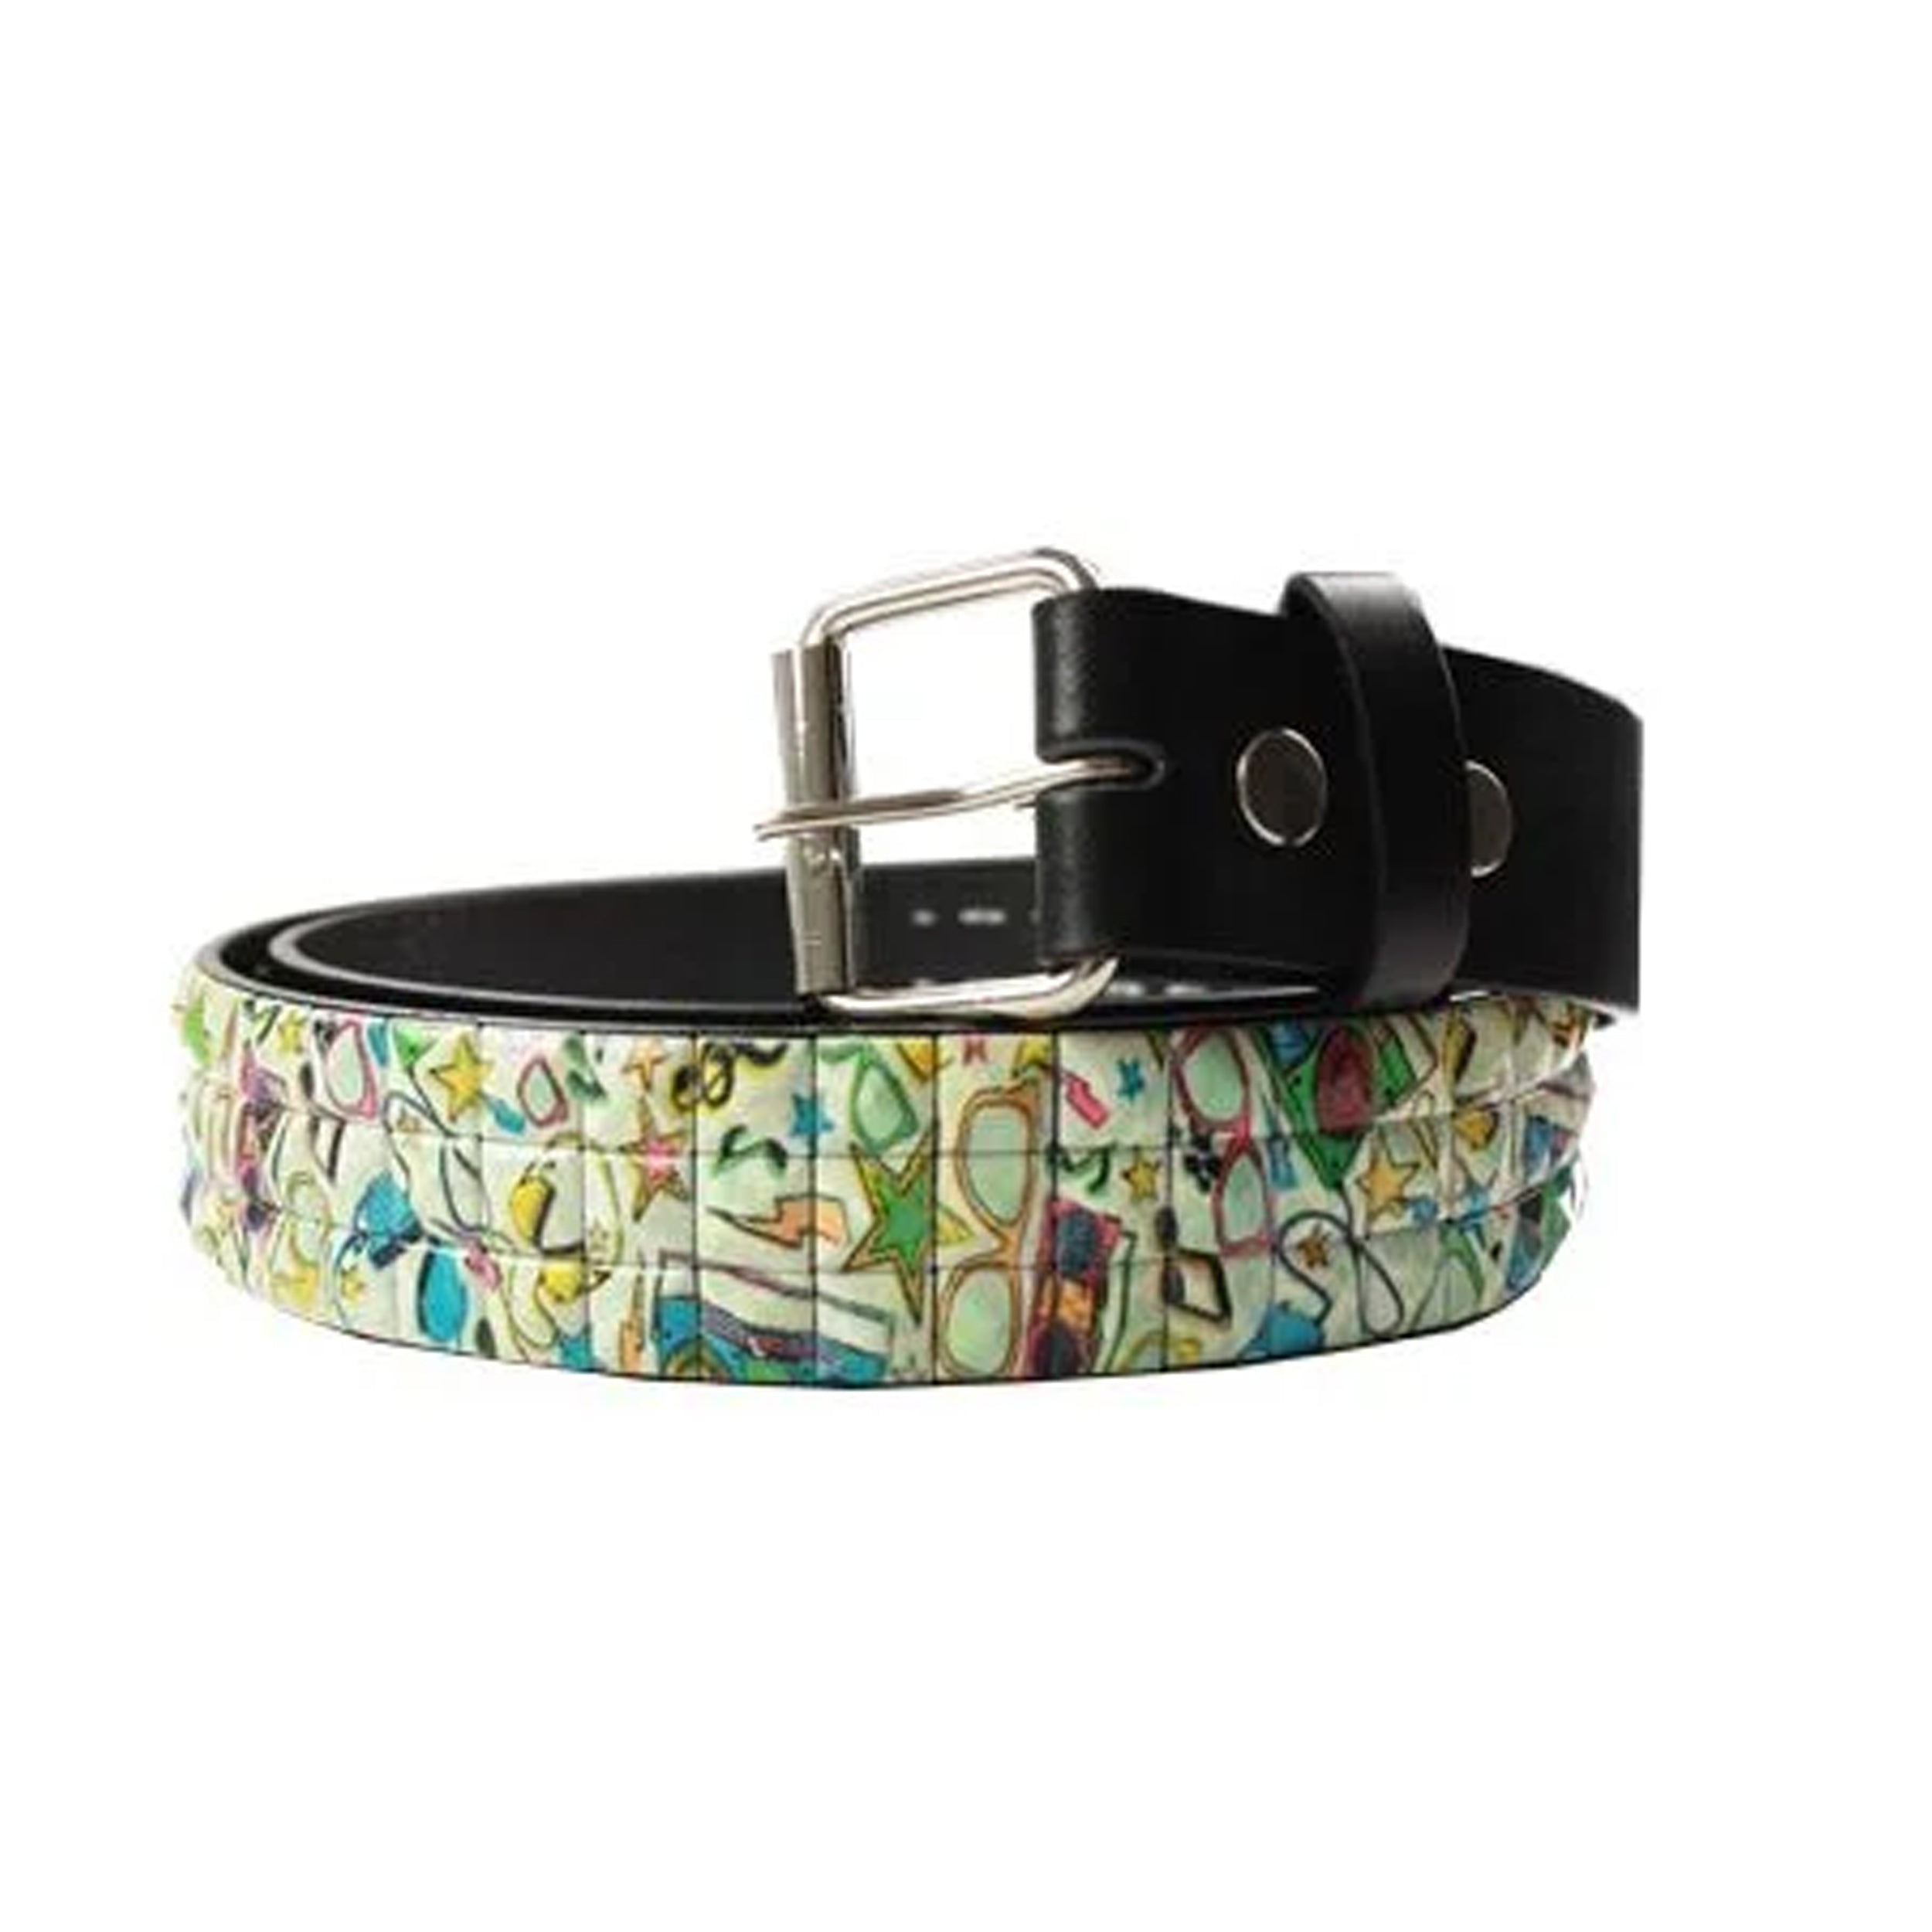 Printed Belts with Buckle for Men's & Women's